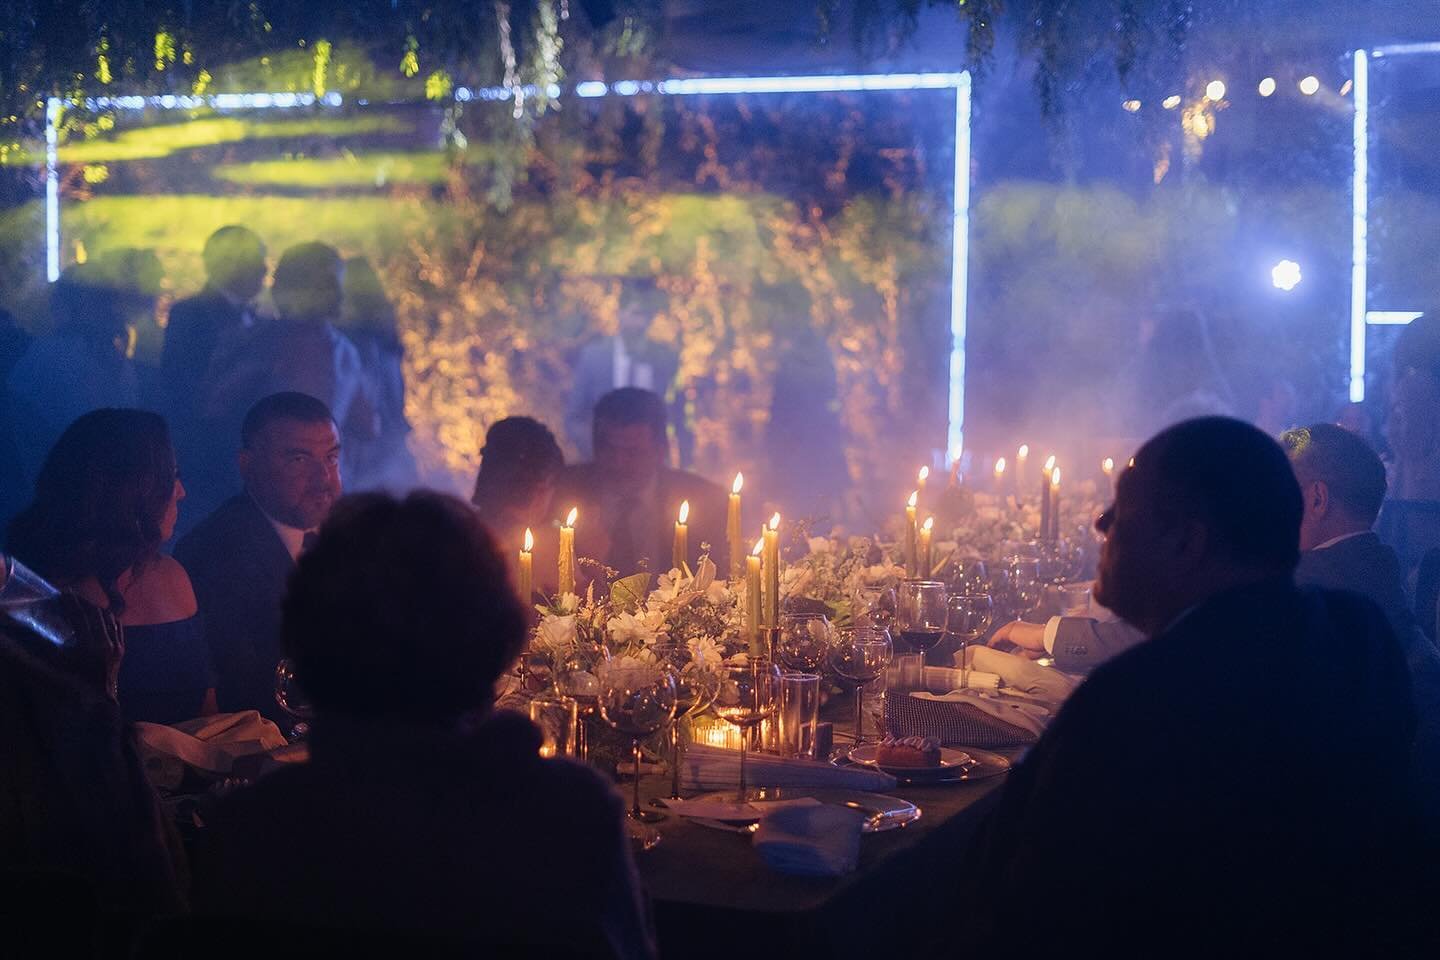 Caught this surreal moment at Ale and Pedro&rsquo;s party, where neon and candlelight came together perfectly&mdash;unplanned yet magical, all thanks to @hugolavi talent for creating the right vibe.

@vinoslacetto